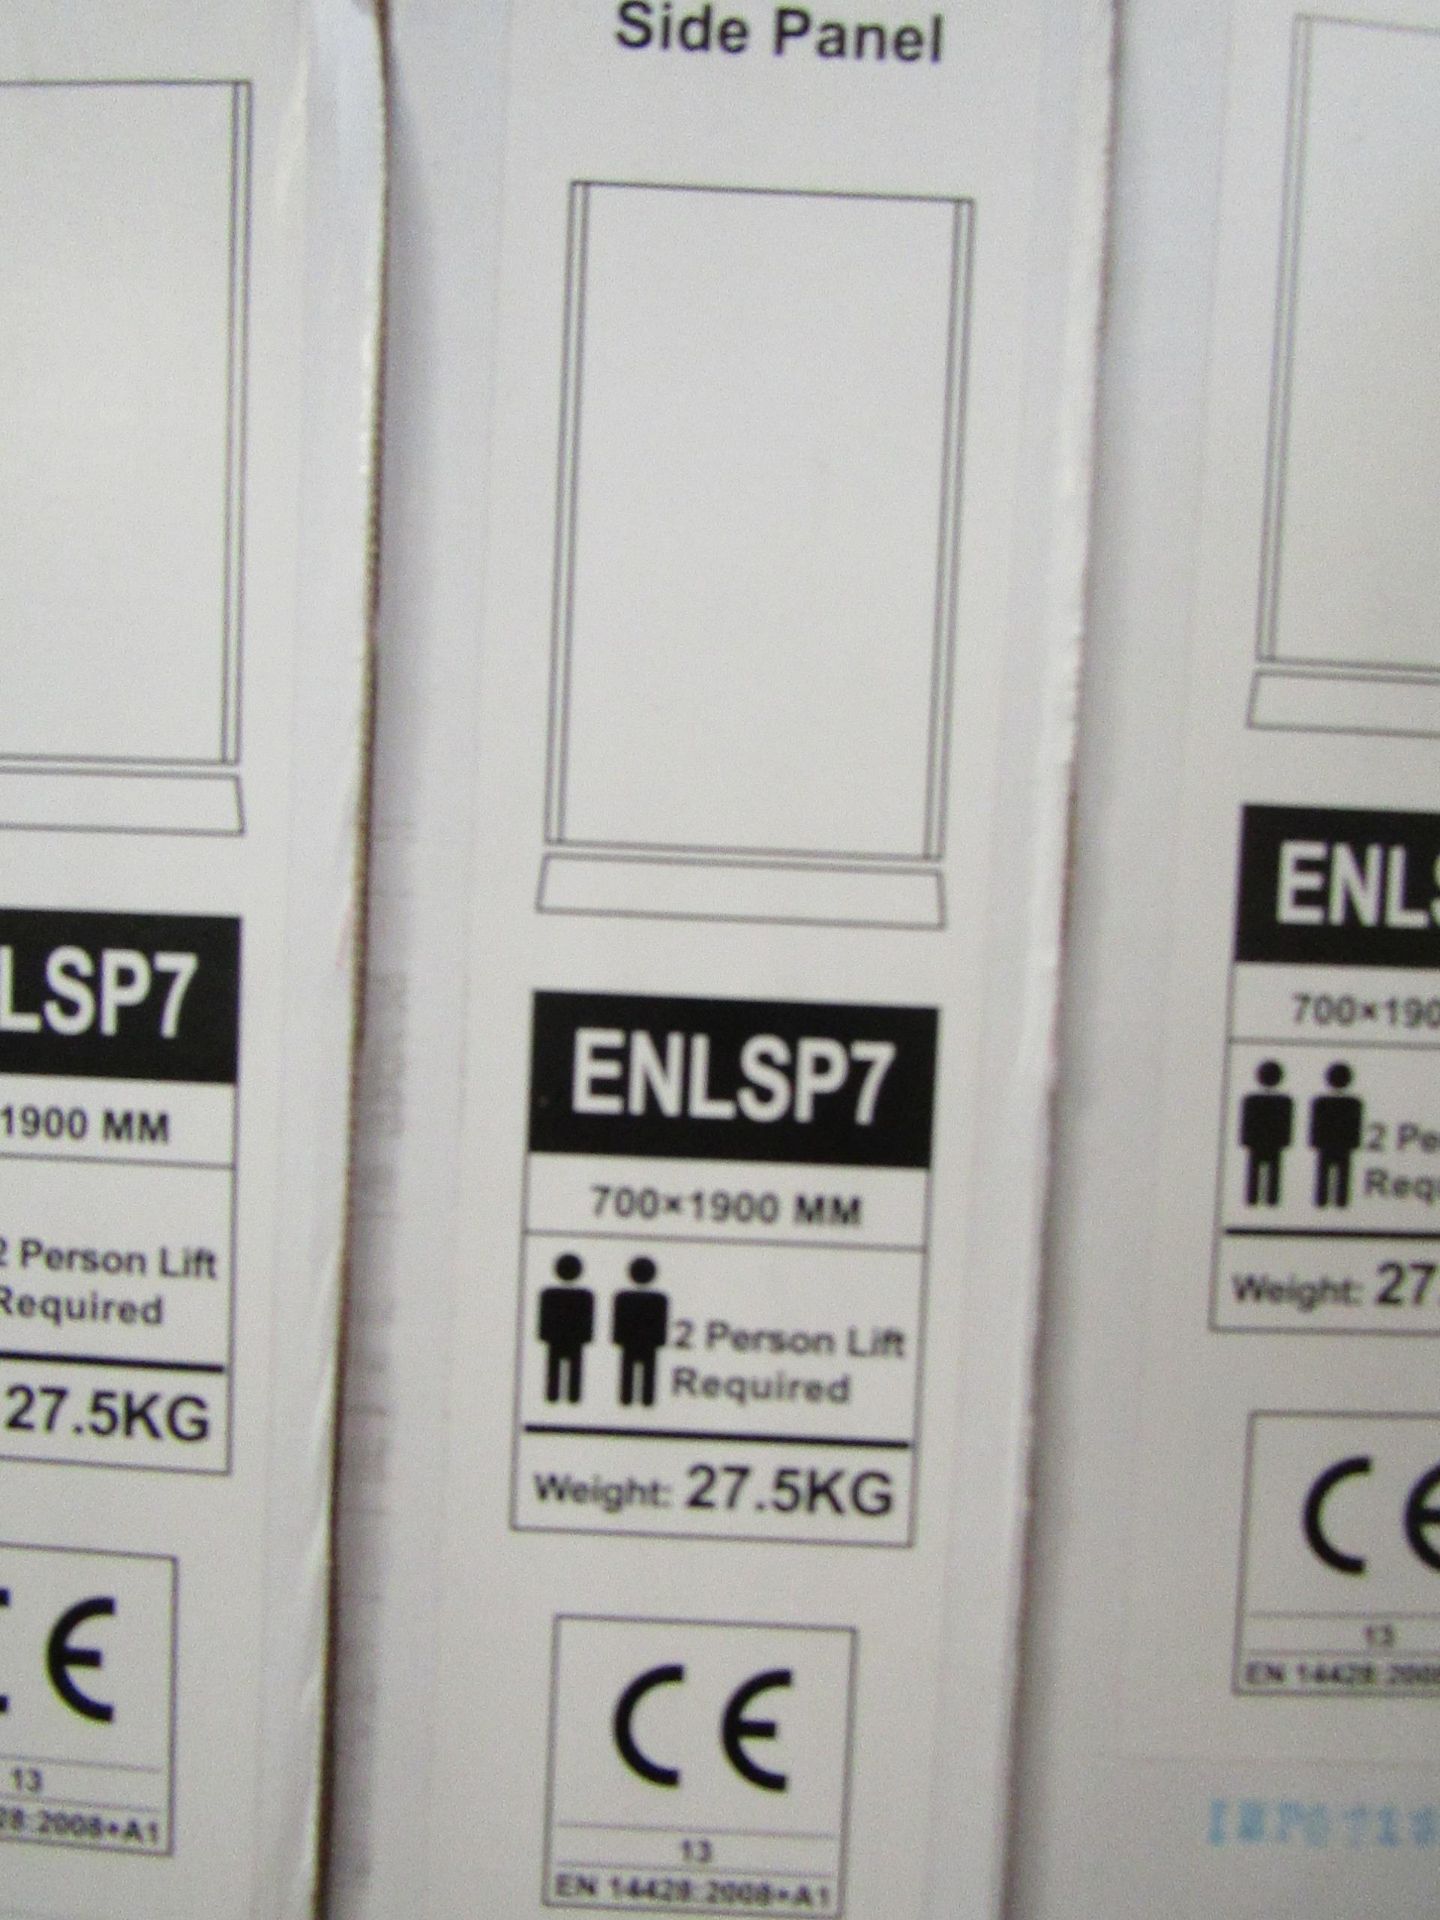 Luxury 8mm 700 side panel ENLSP7, New and boxed. RRP œ137. - Image 2 of 2